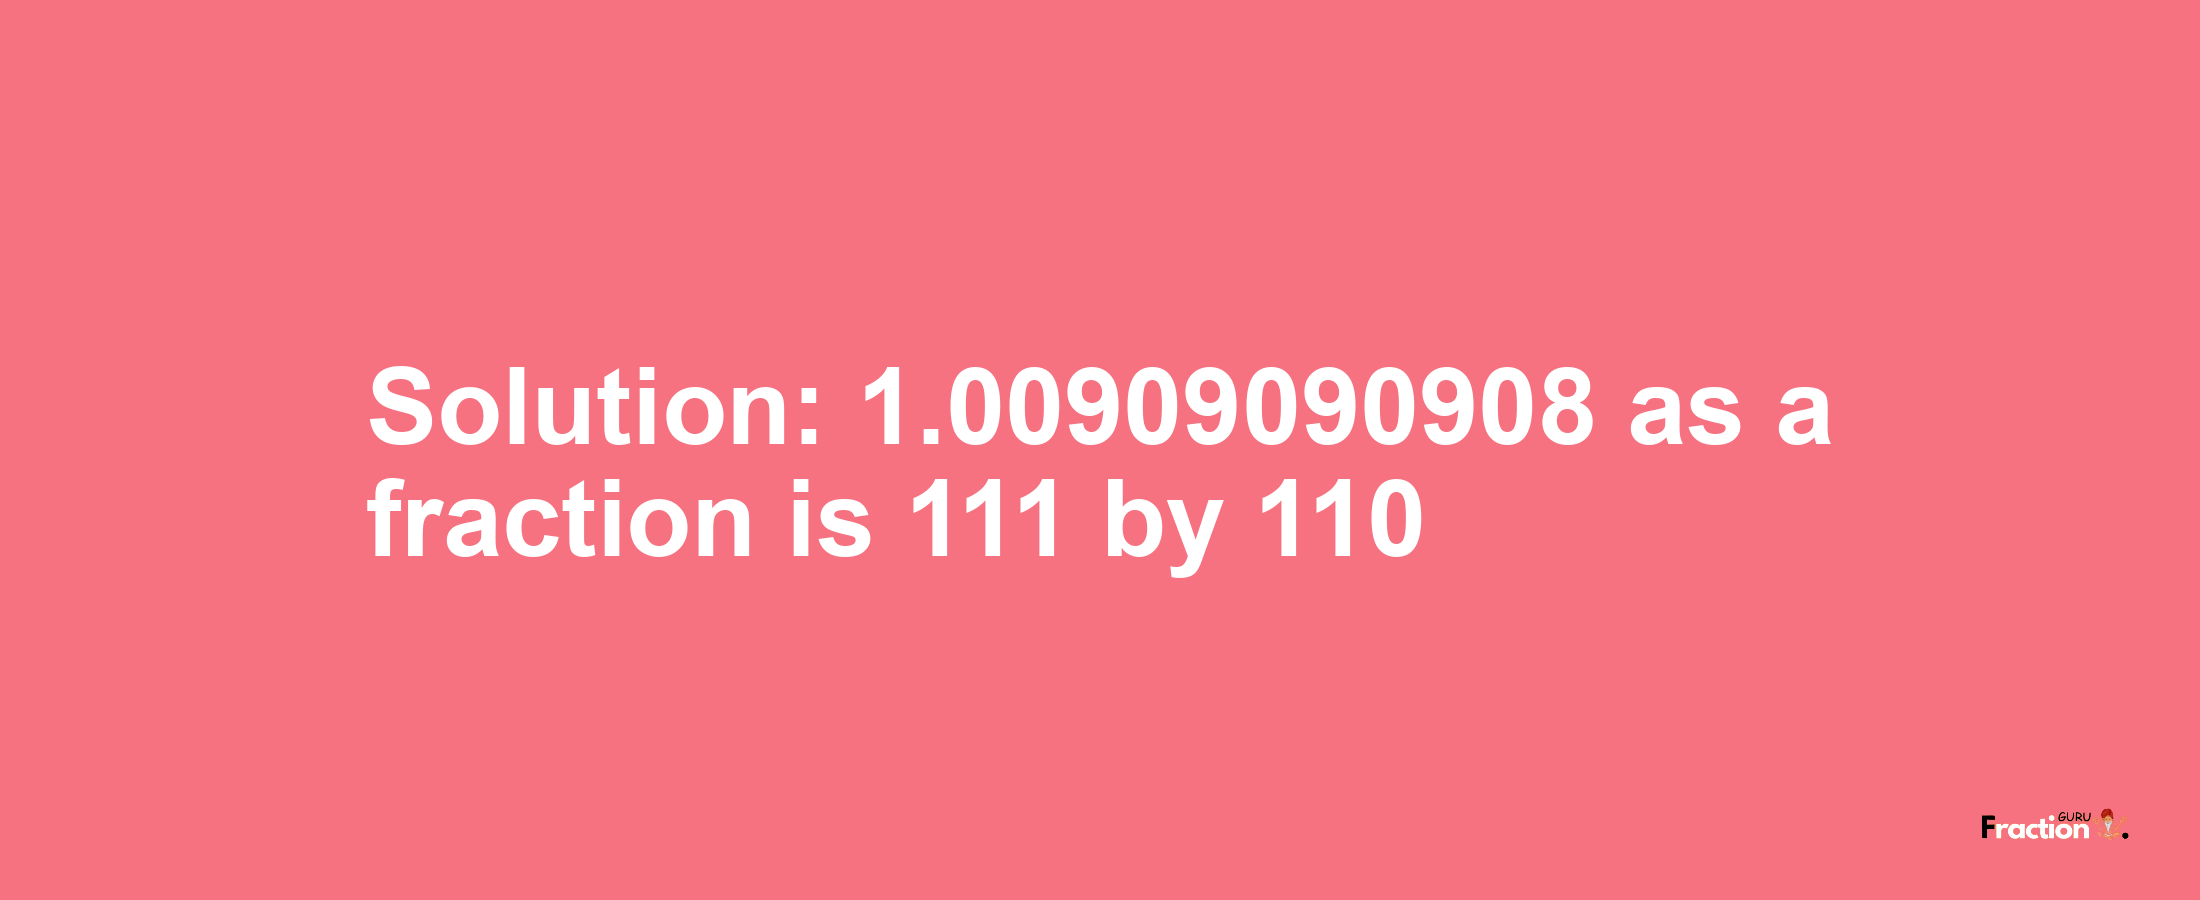 Solution:1.00909090908 as a fraction is 111/110